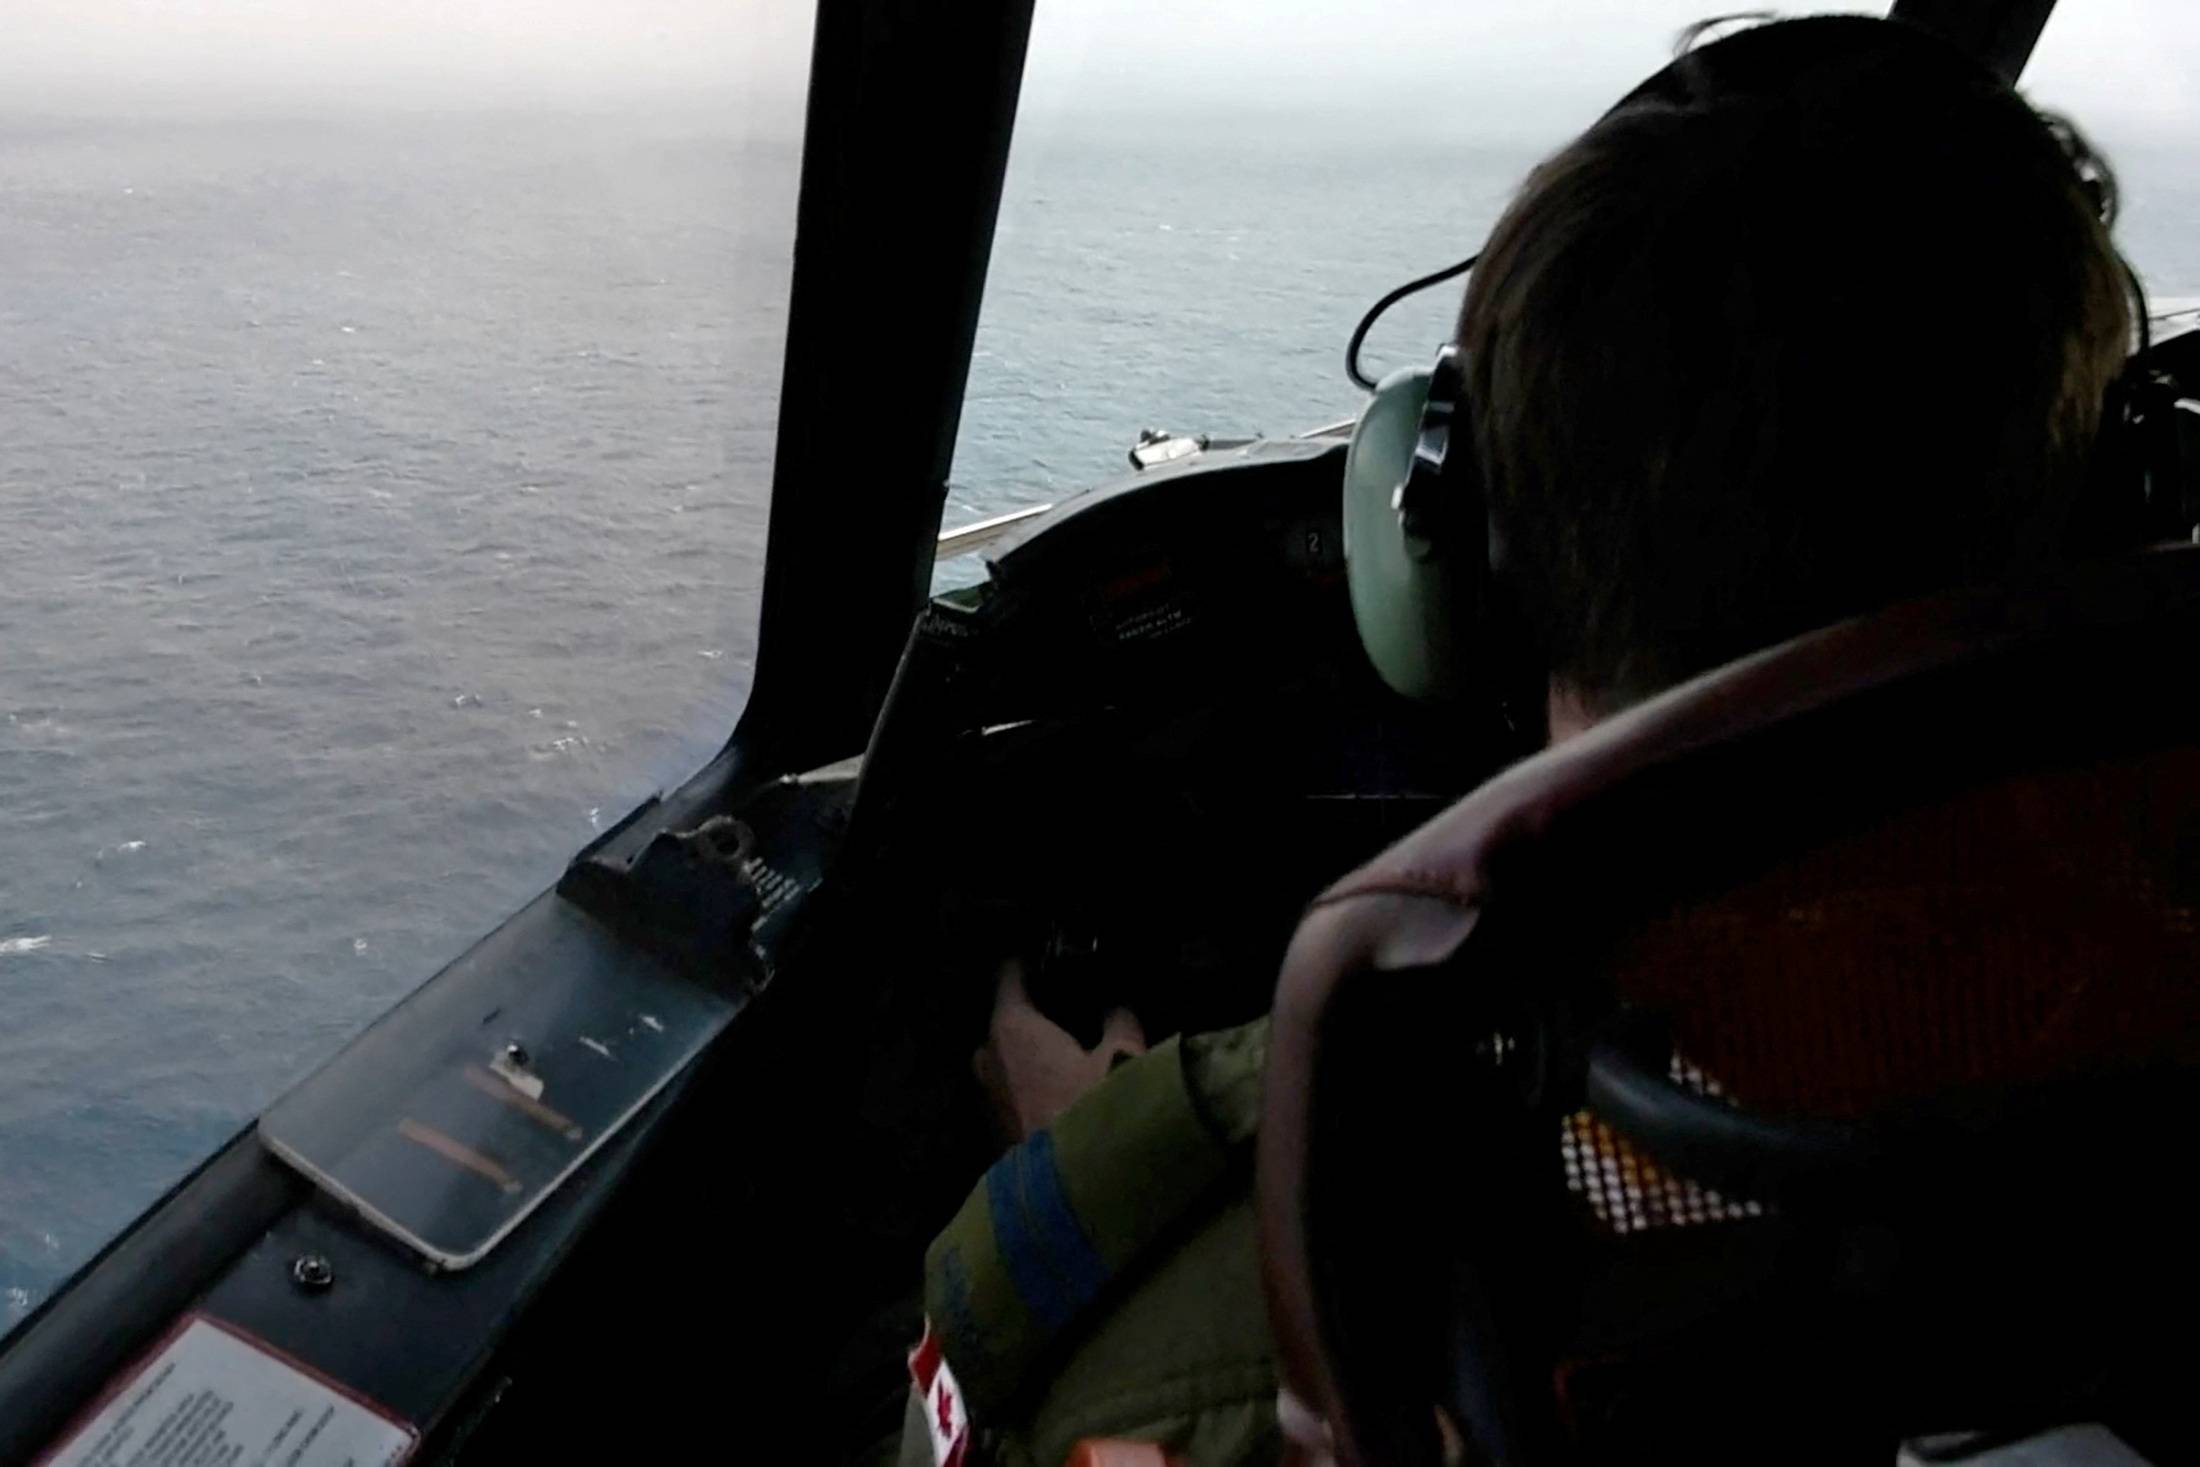 The pilot of a Royal Canadian Air Force CP-140 Aurora maritime surveillance aircraft of 14 Wing flies a search pattern for the missing OceanGate submersible, which had been carrying five people to explore the wreck of the sunken SS Titanic, in the Atlantic Ocean off Newfoundland, Canada, on Tuesday. | CANADIAN FORCES / VIA REUTERS 